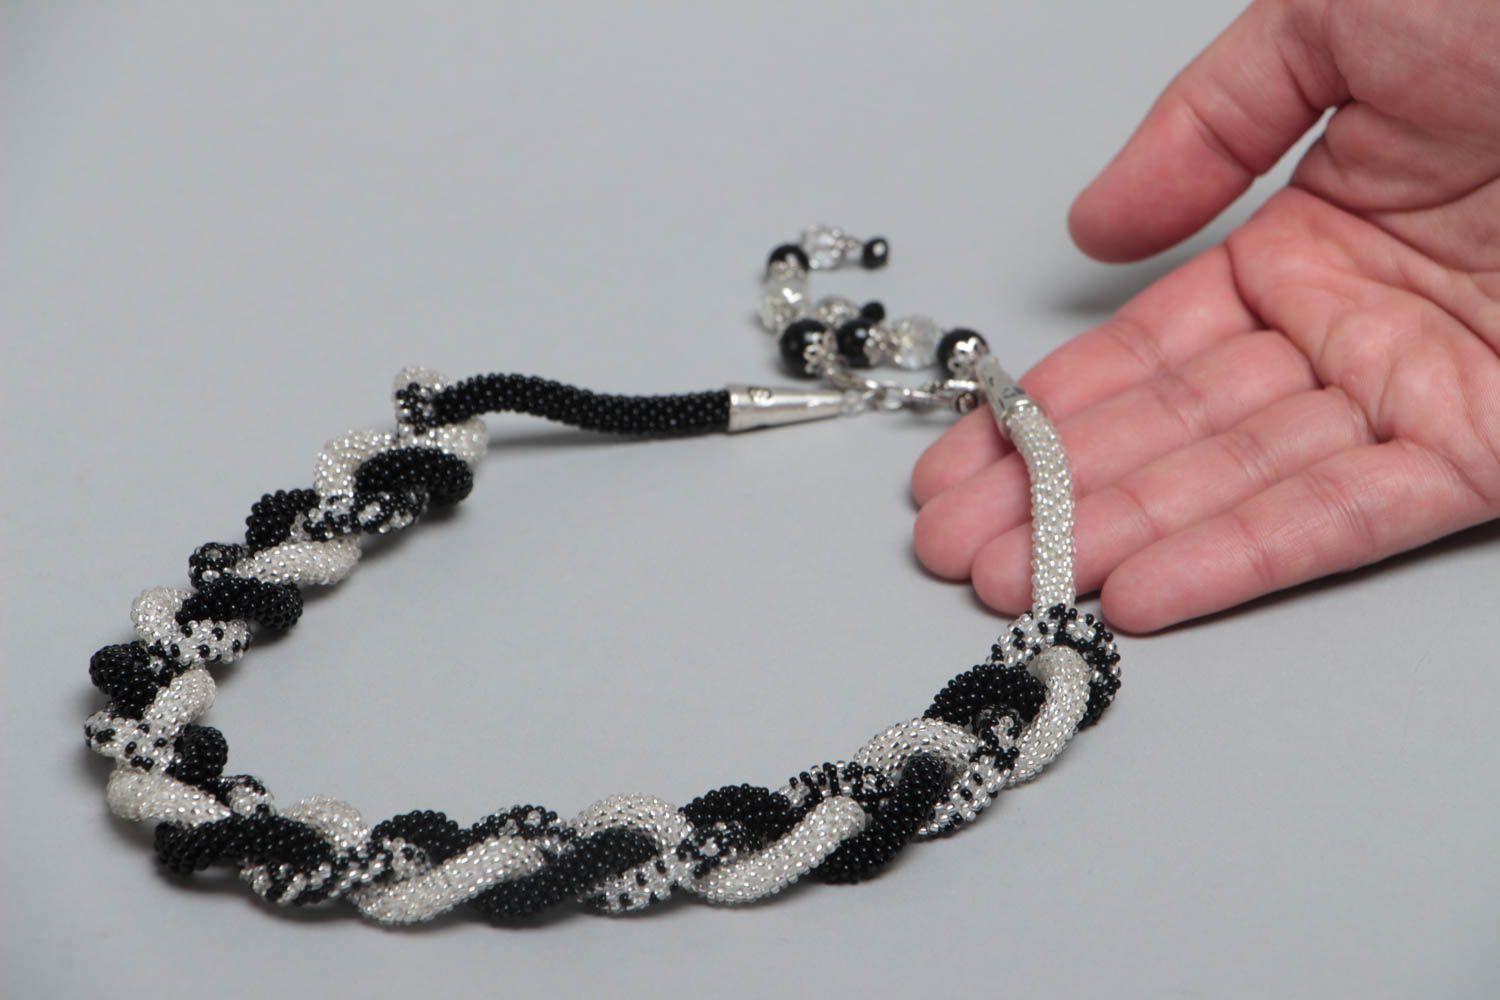 Handmade beaded necklace in black and silver colors transformer jewelry photo 5